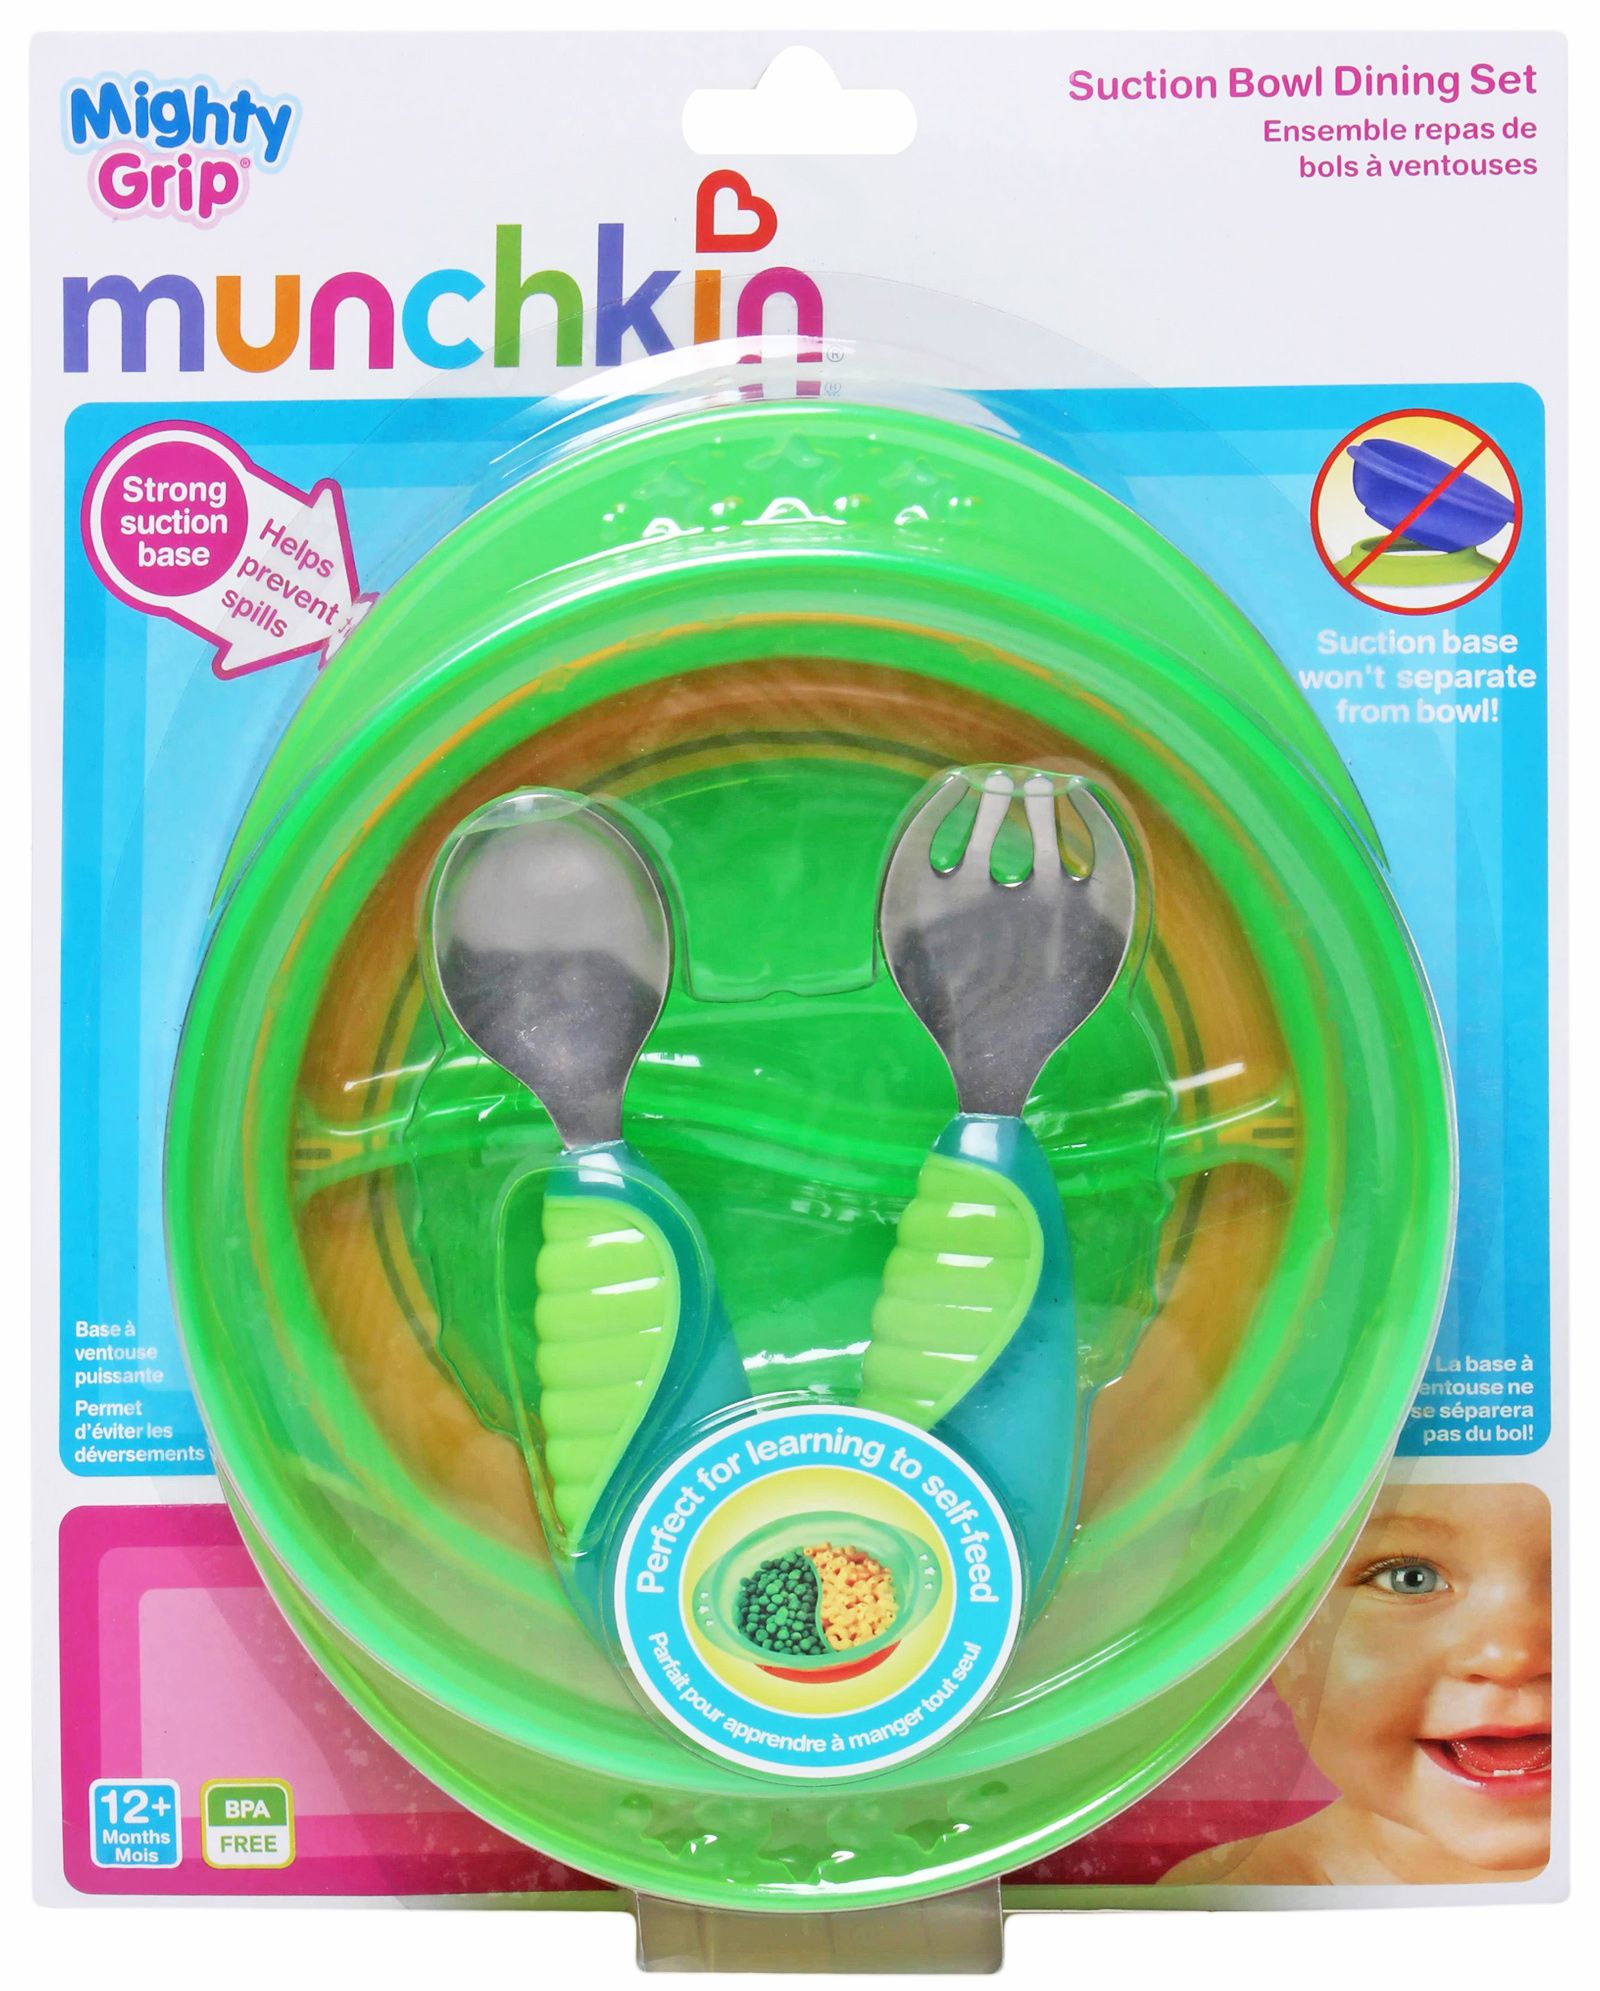 Munchkin - Mighty Grip Suction Bowl Dining Set